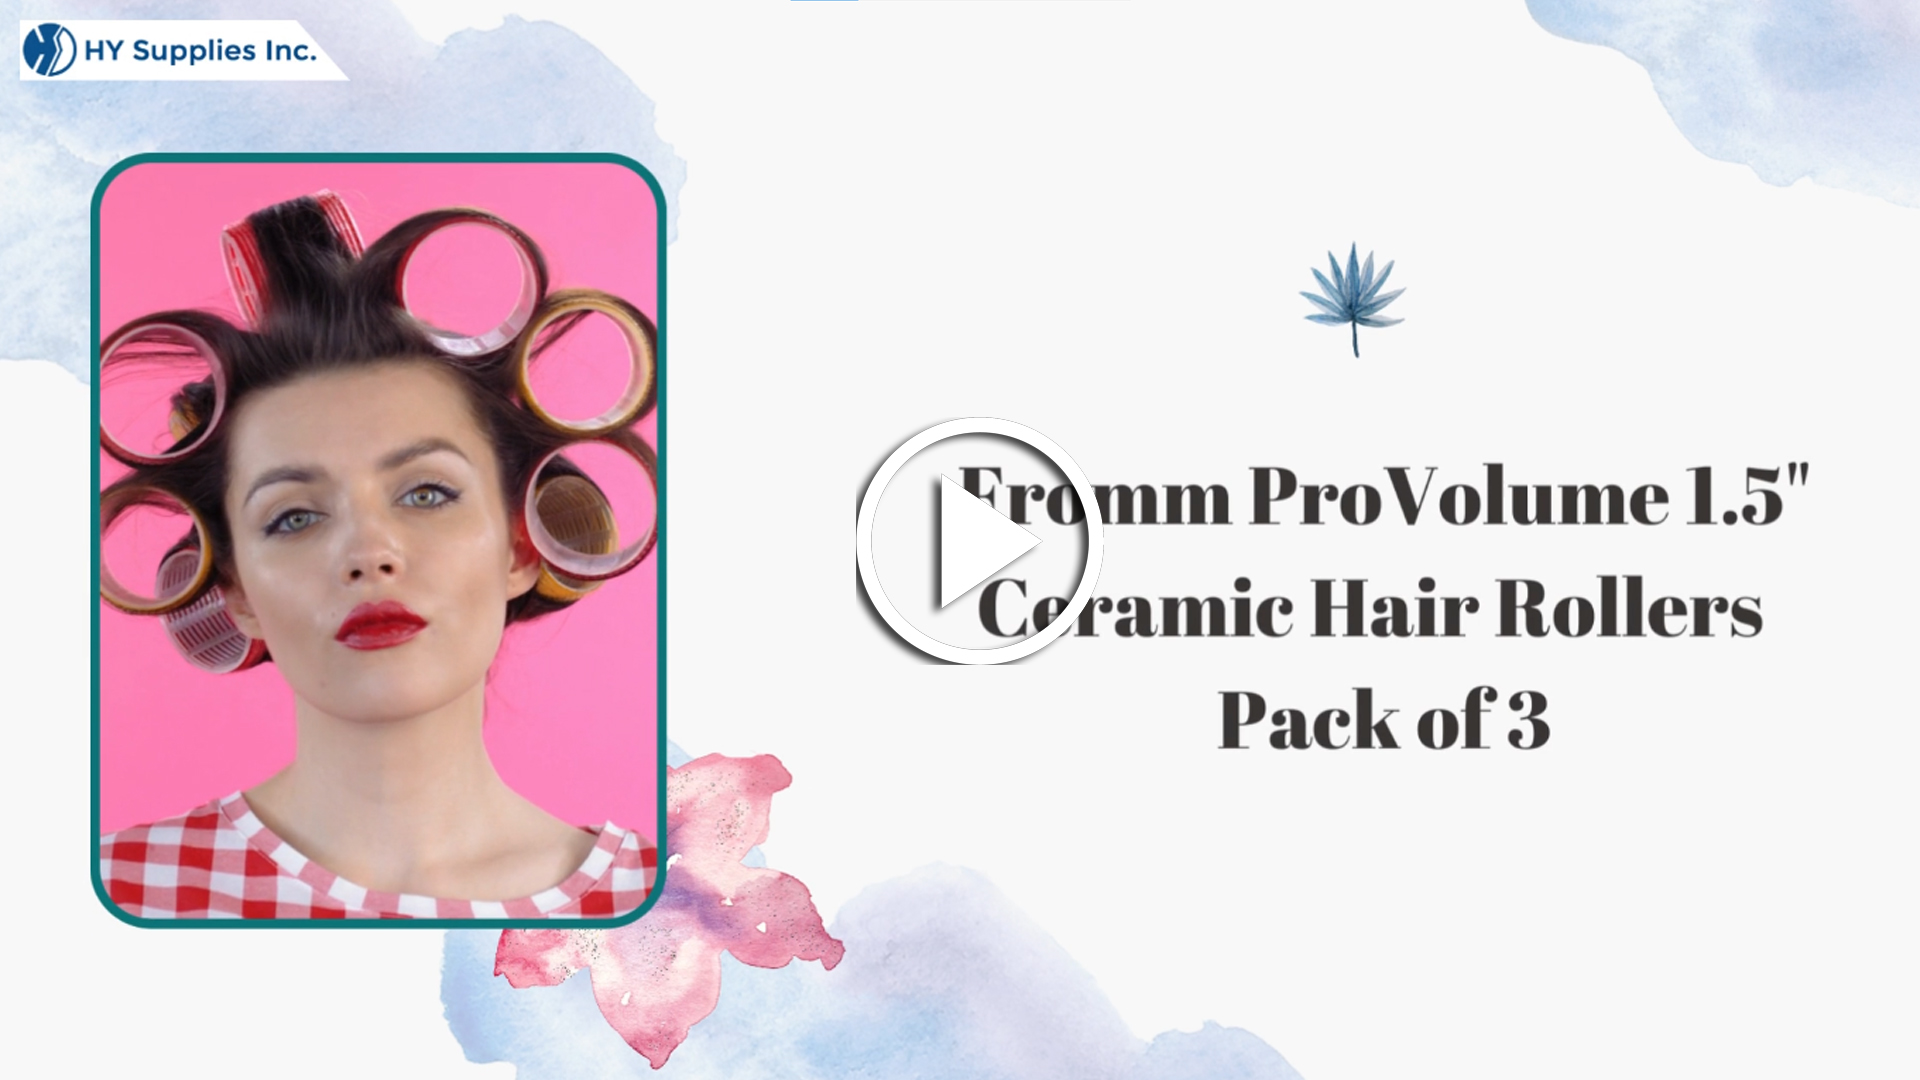 Fromm ProVolume 1.5" Ceramic Hair Rollers - Pack of 3